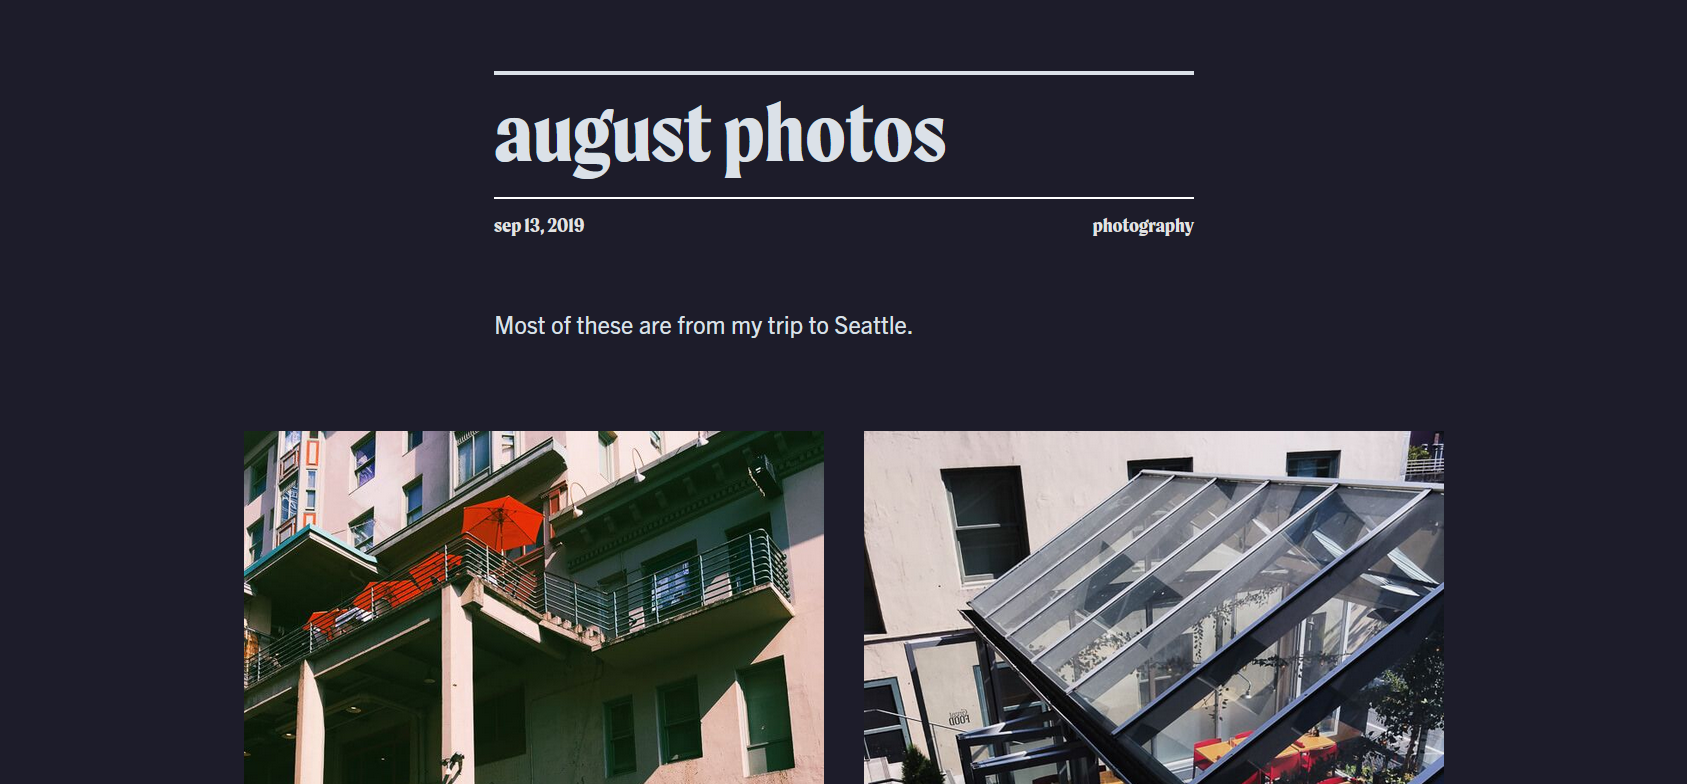 A blog post titled 'August Photos' and picturing a glimpse of two pictures of buildings.